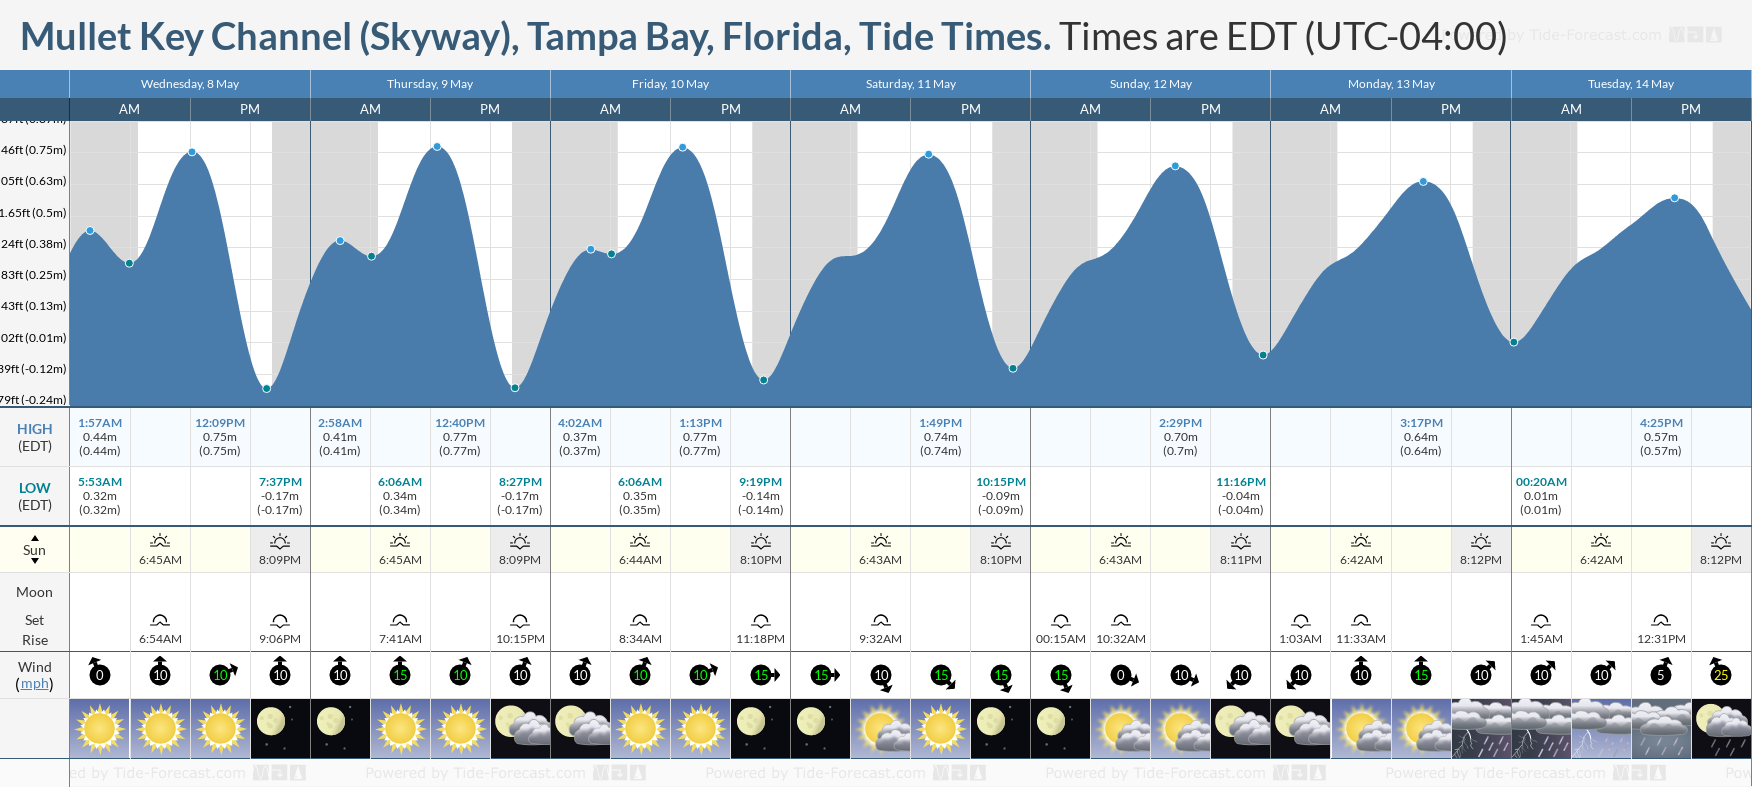 Mullet Key Channel (Skyway), Tampa Bay, Florida Tide Chart including high and low tide tide times for the next 7 days